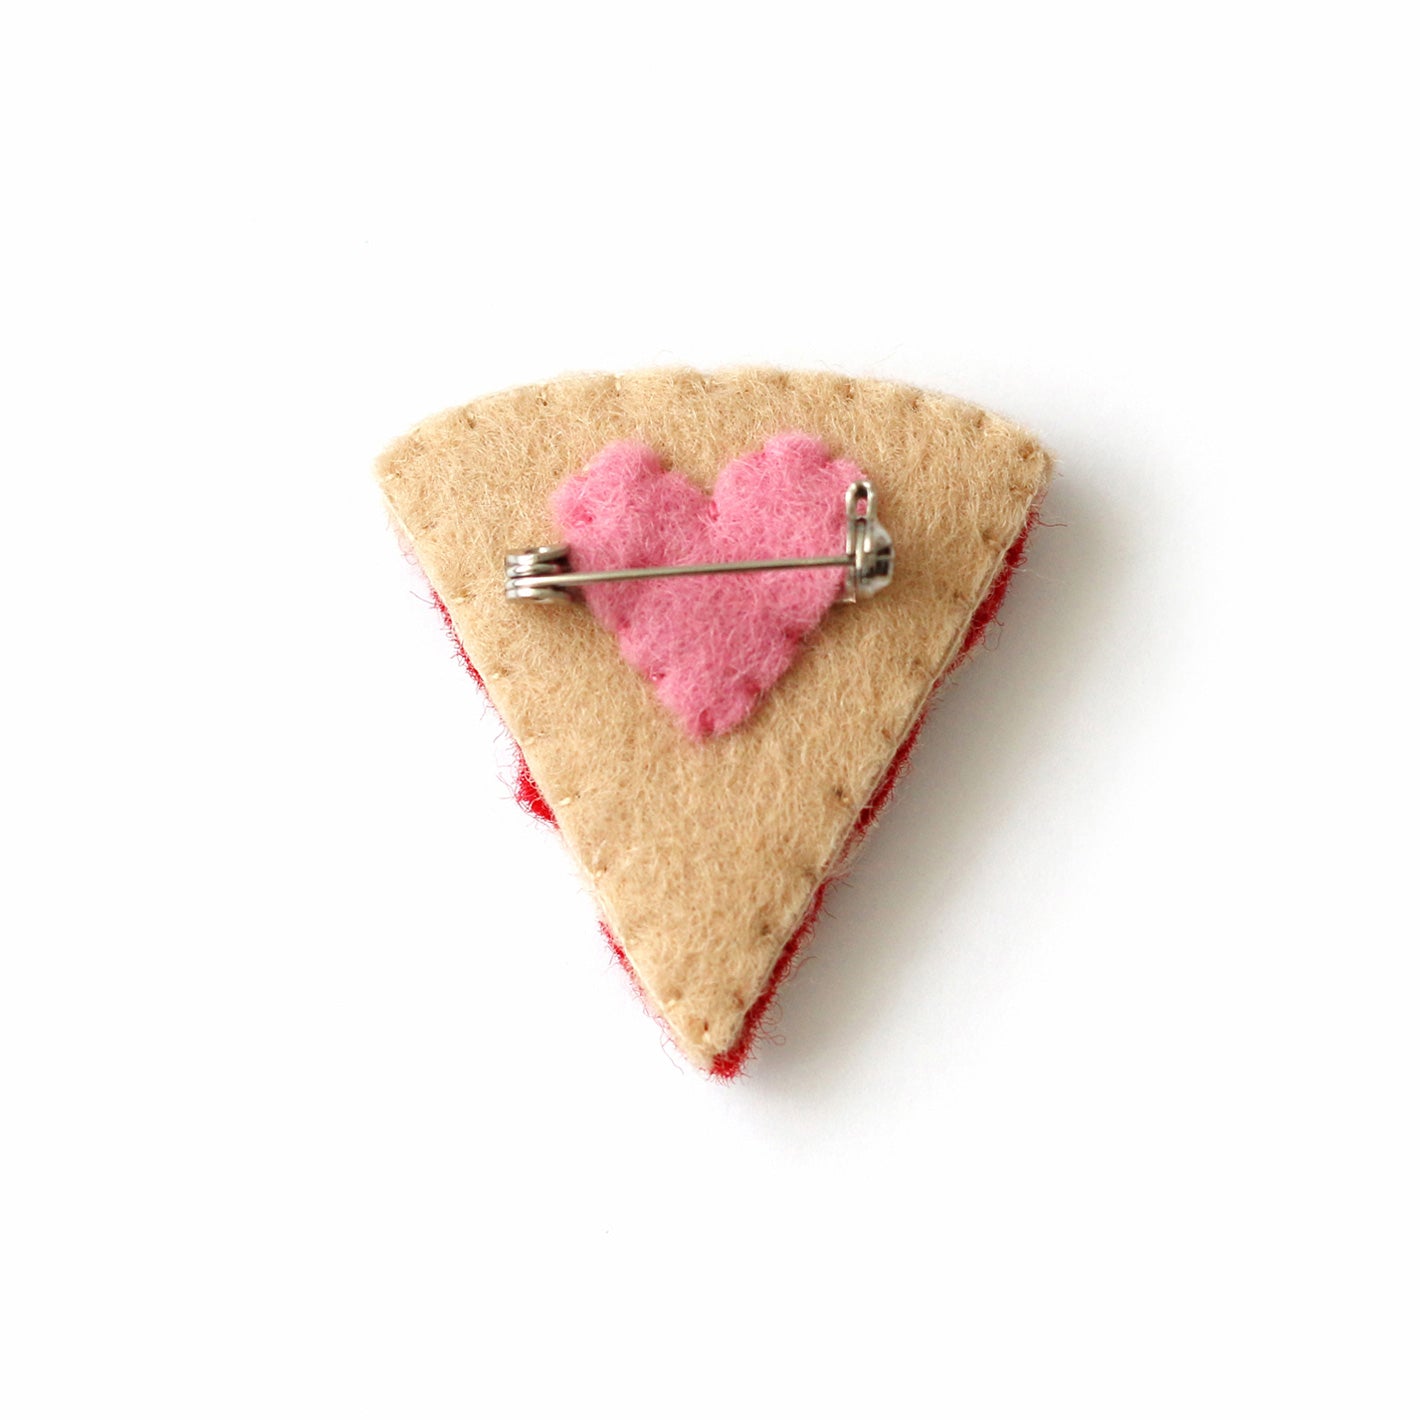 back of pepperoni pizza brooch showing brooch back and a heart shaped felt piece